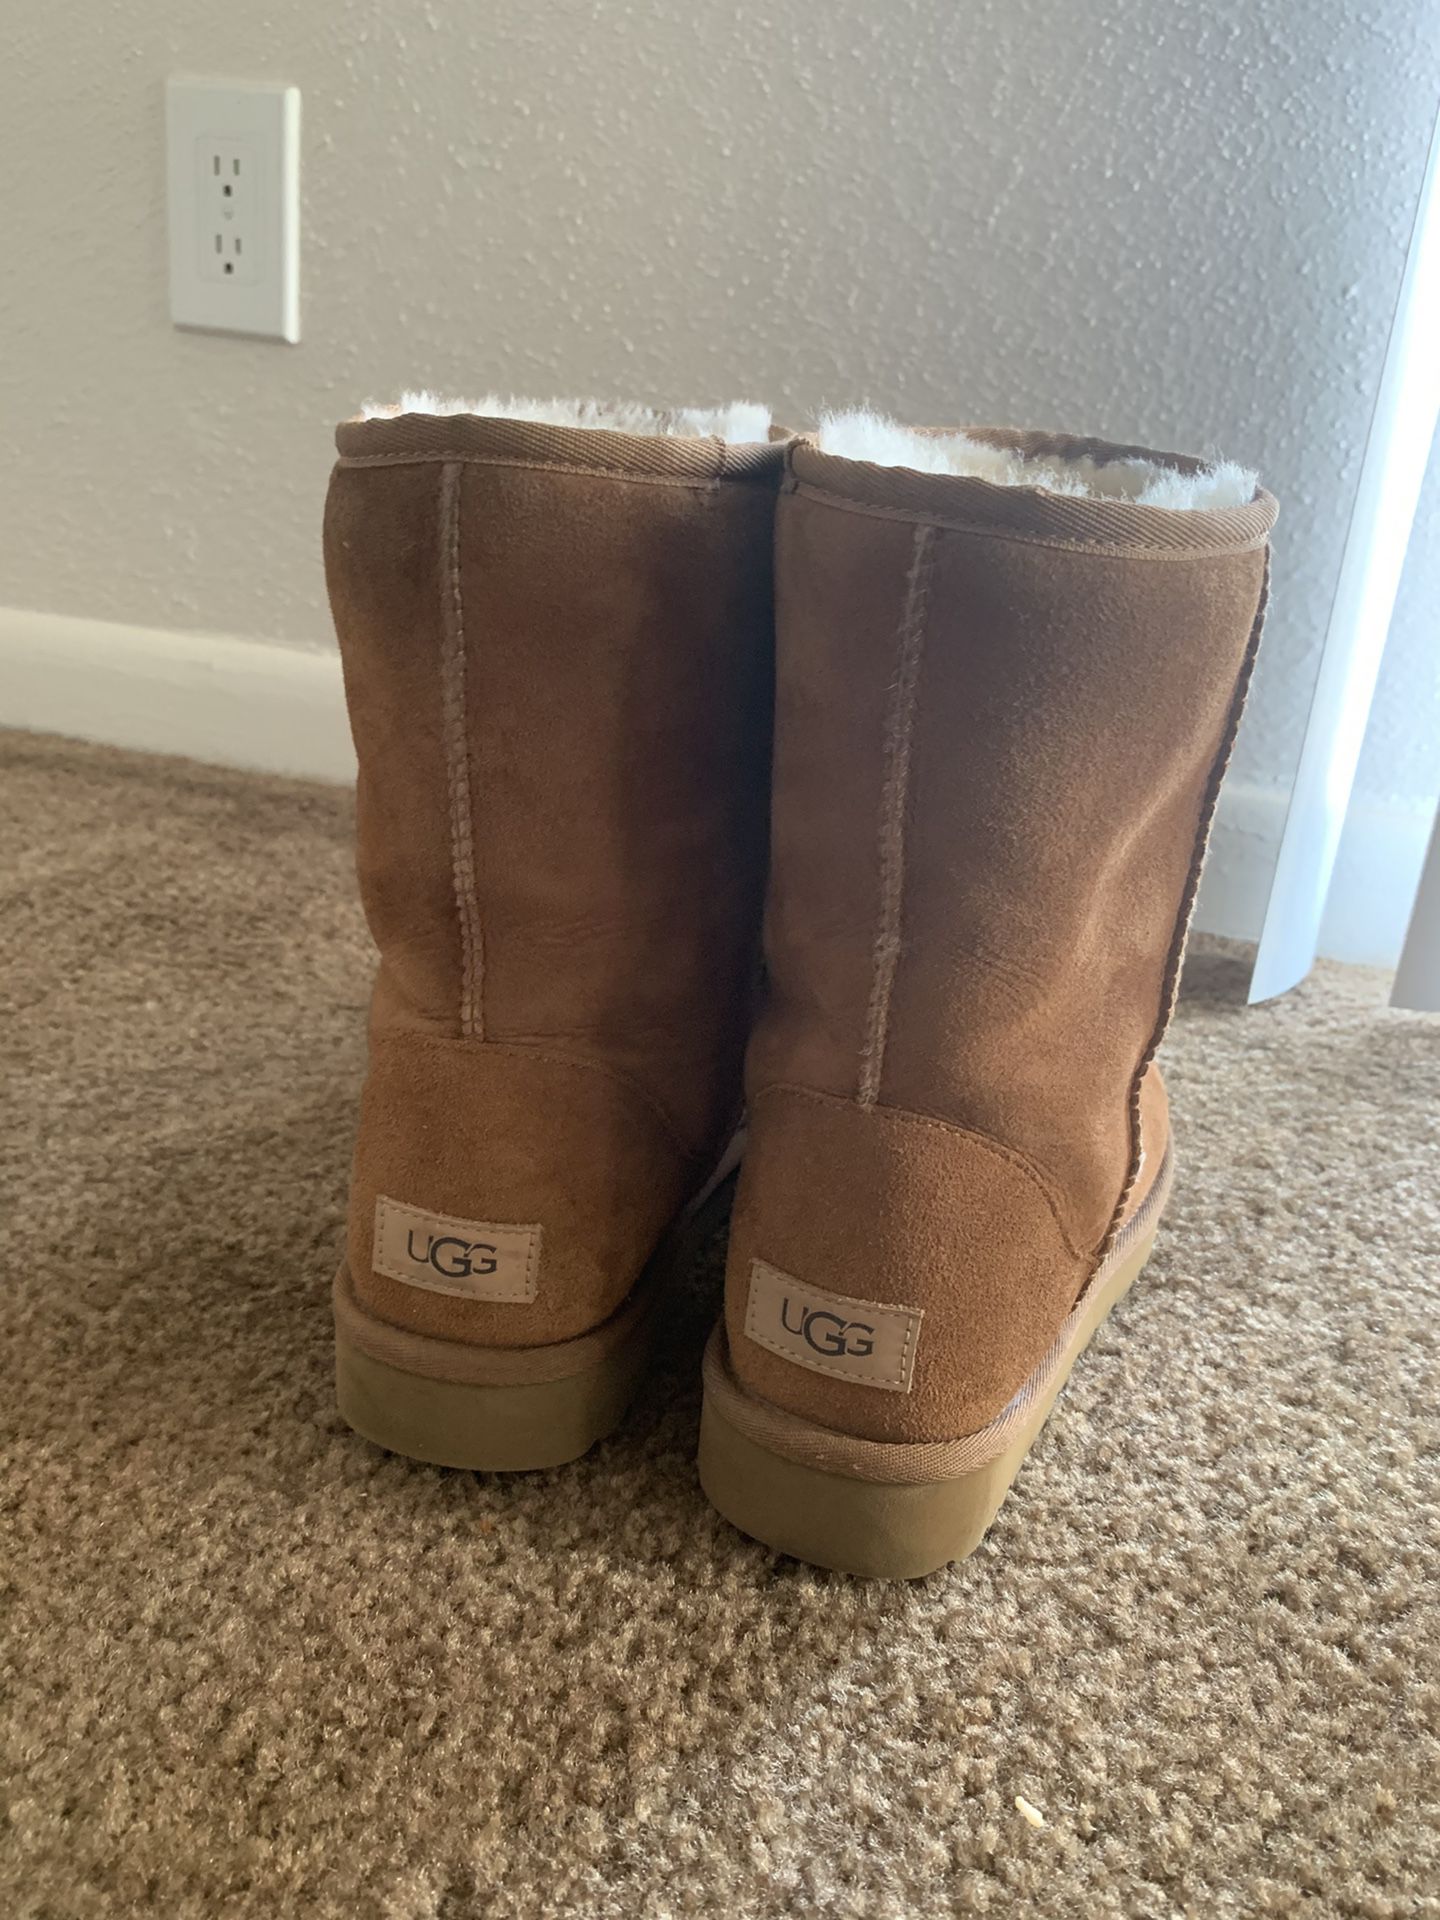 Hardly used UGG for $90